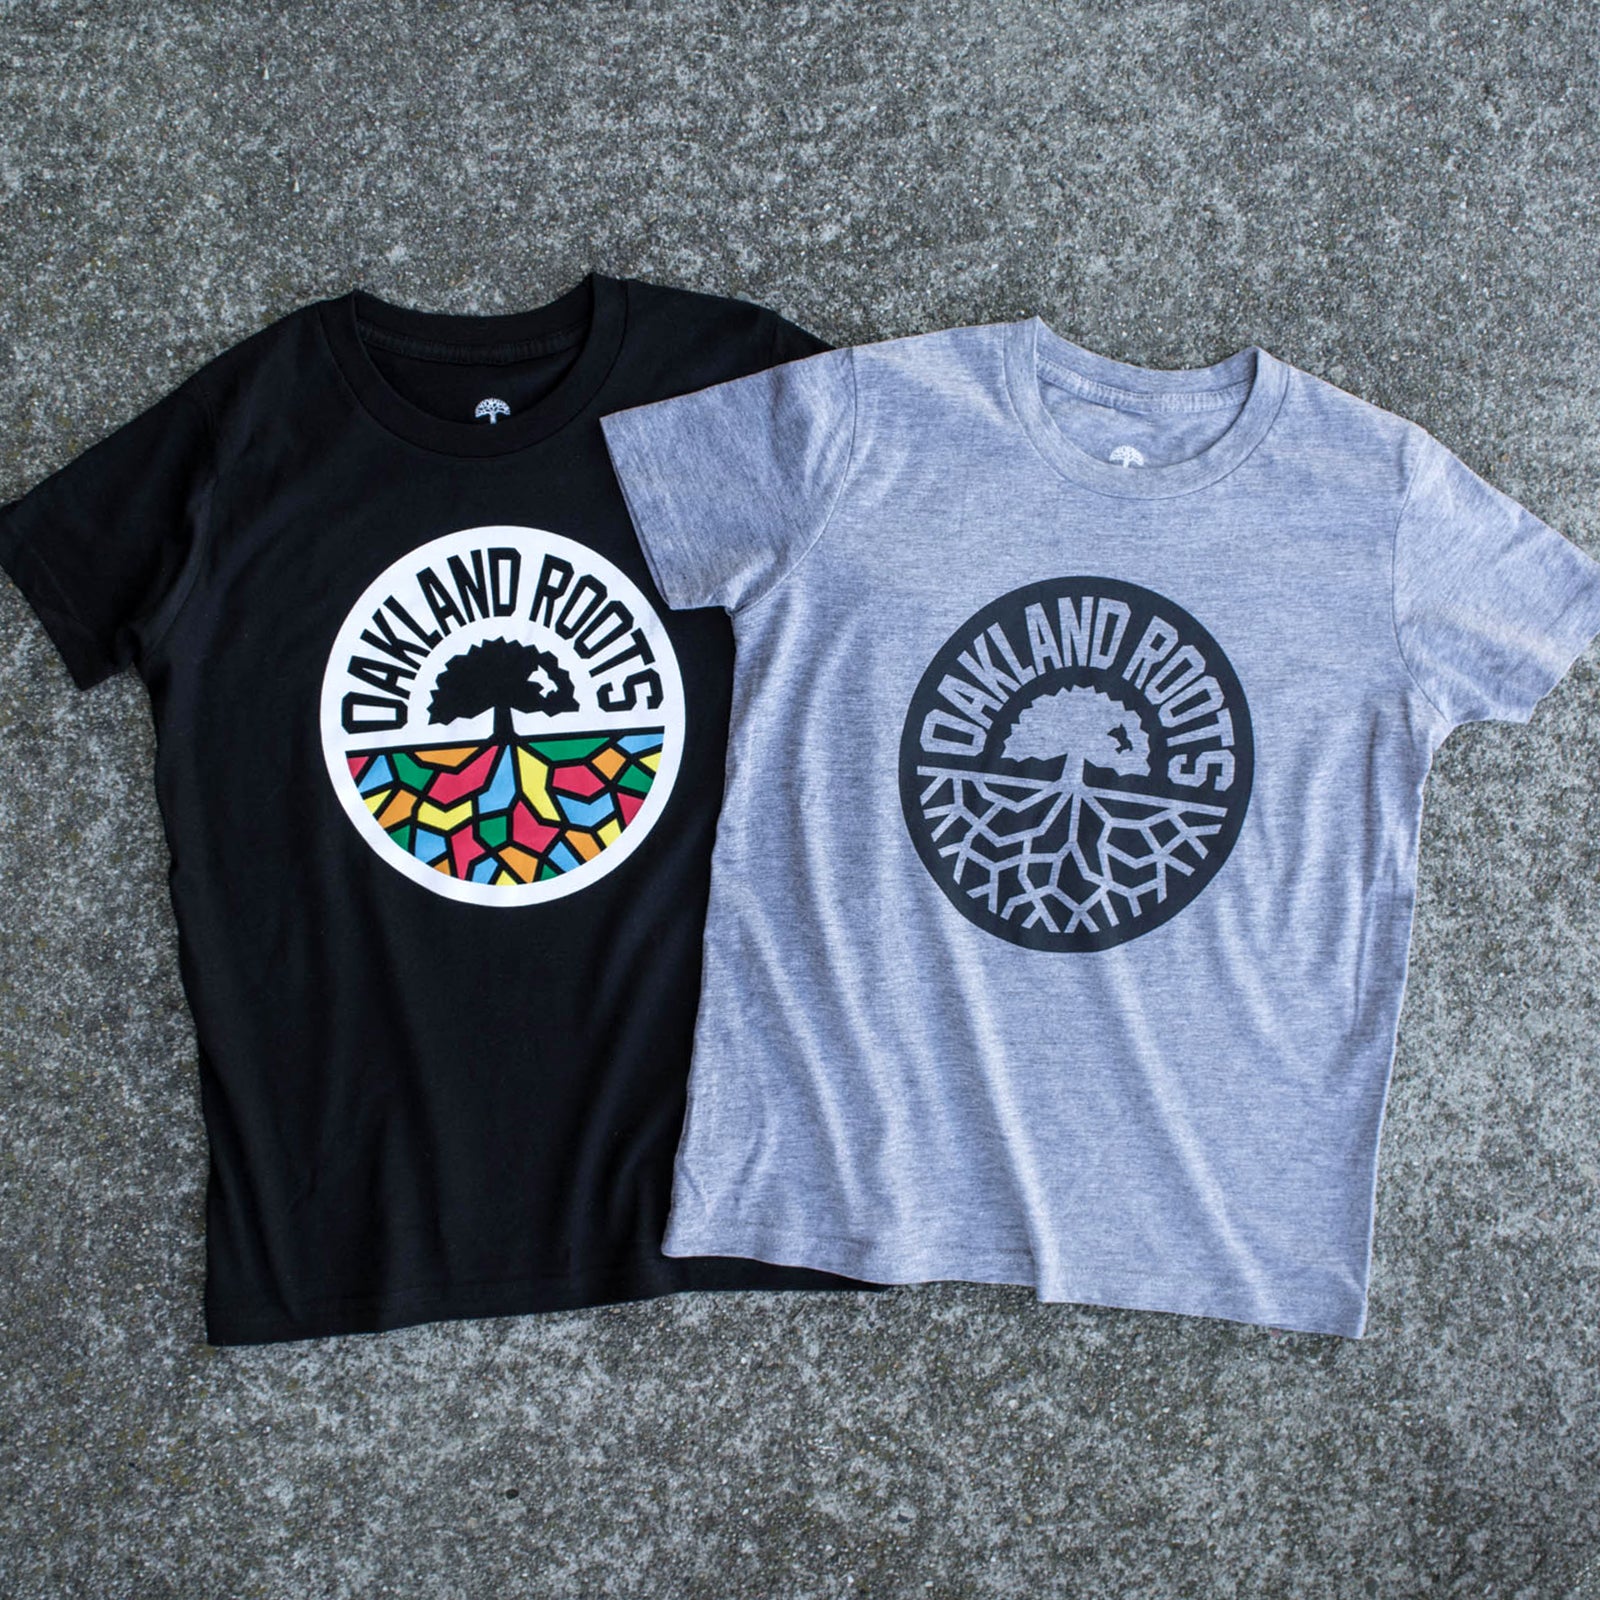 Two youth-sized t-shirts on cement, one black with full-color logo and one grey with black logo.